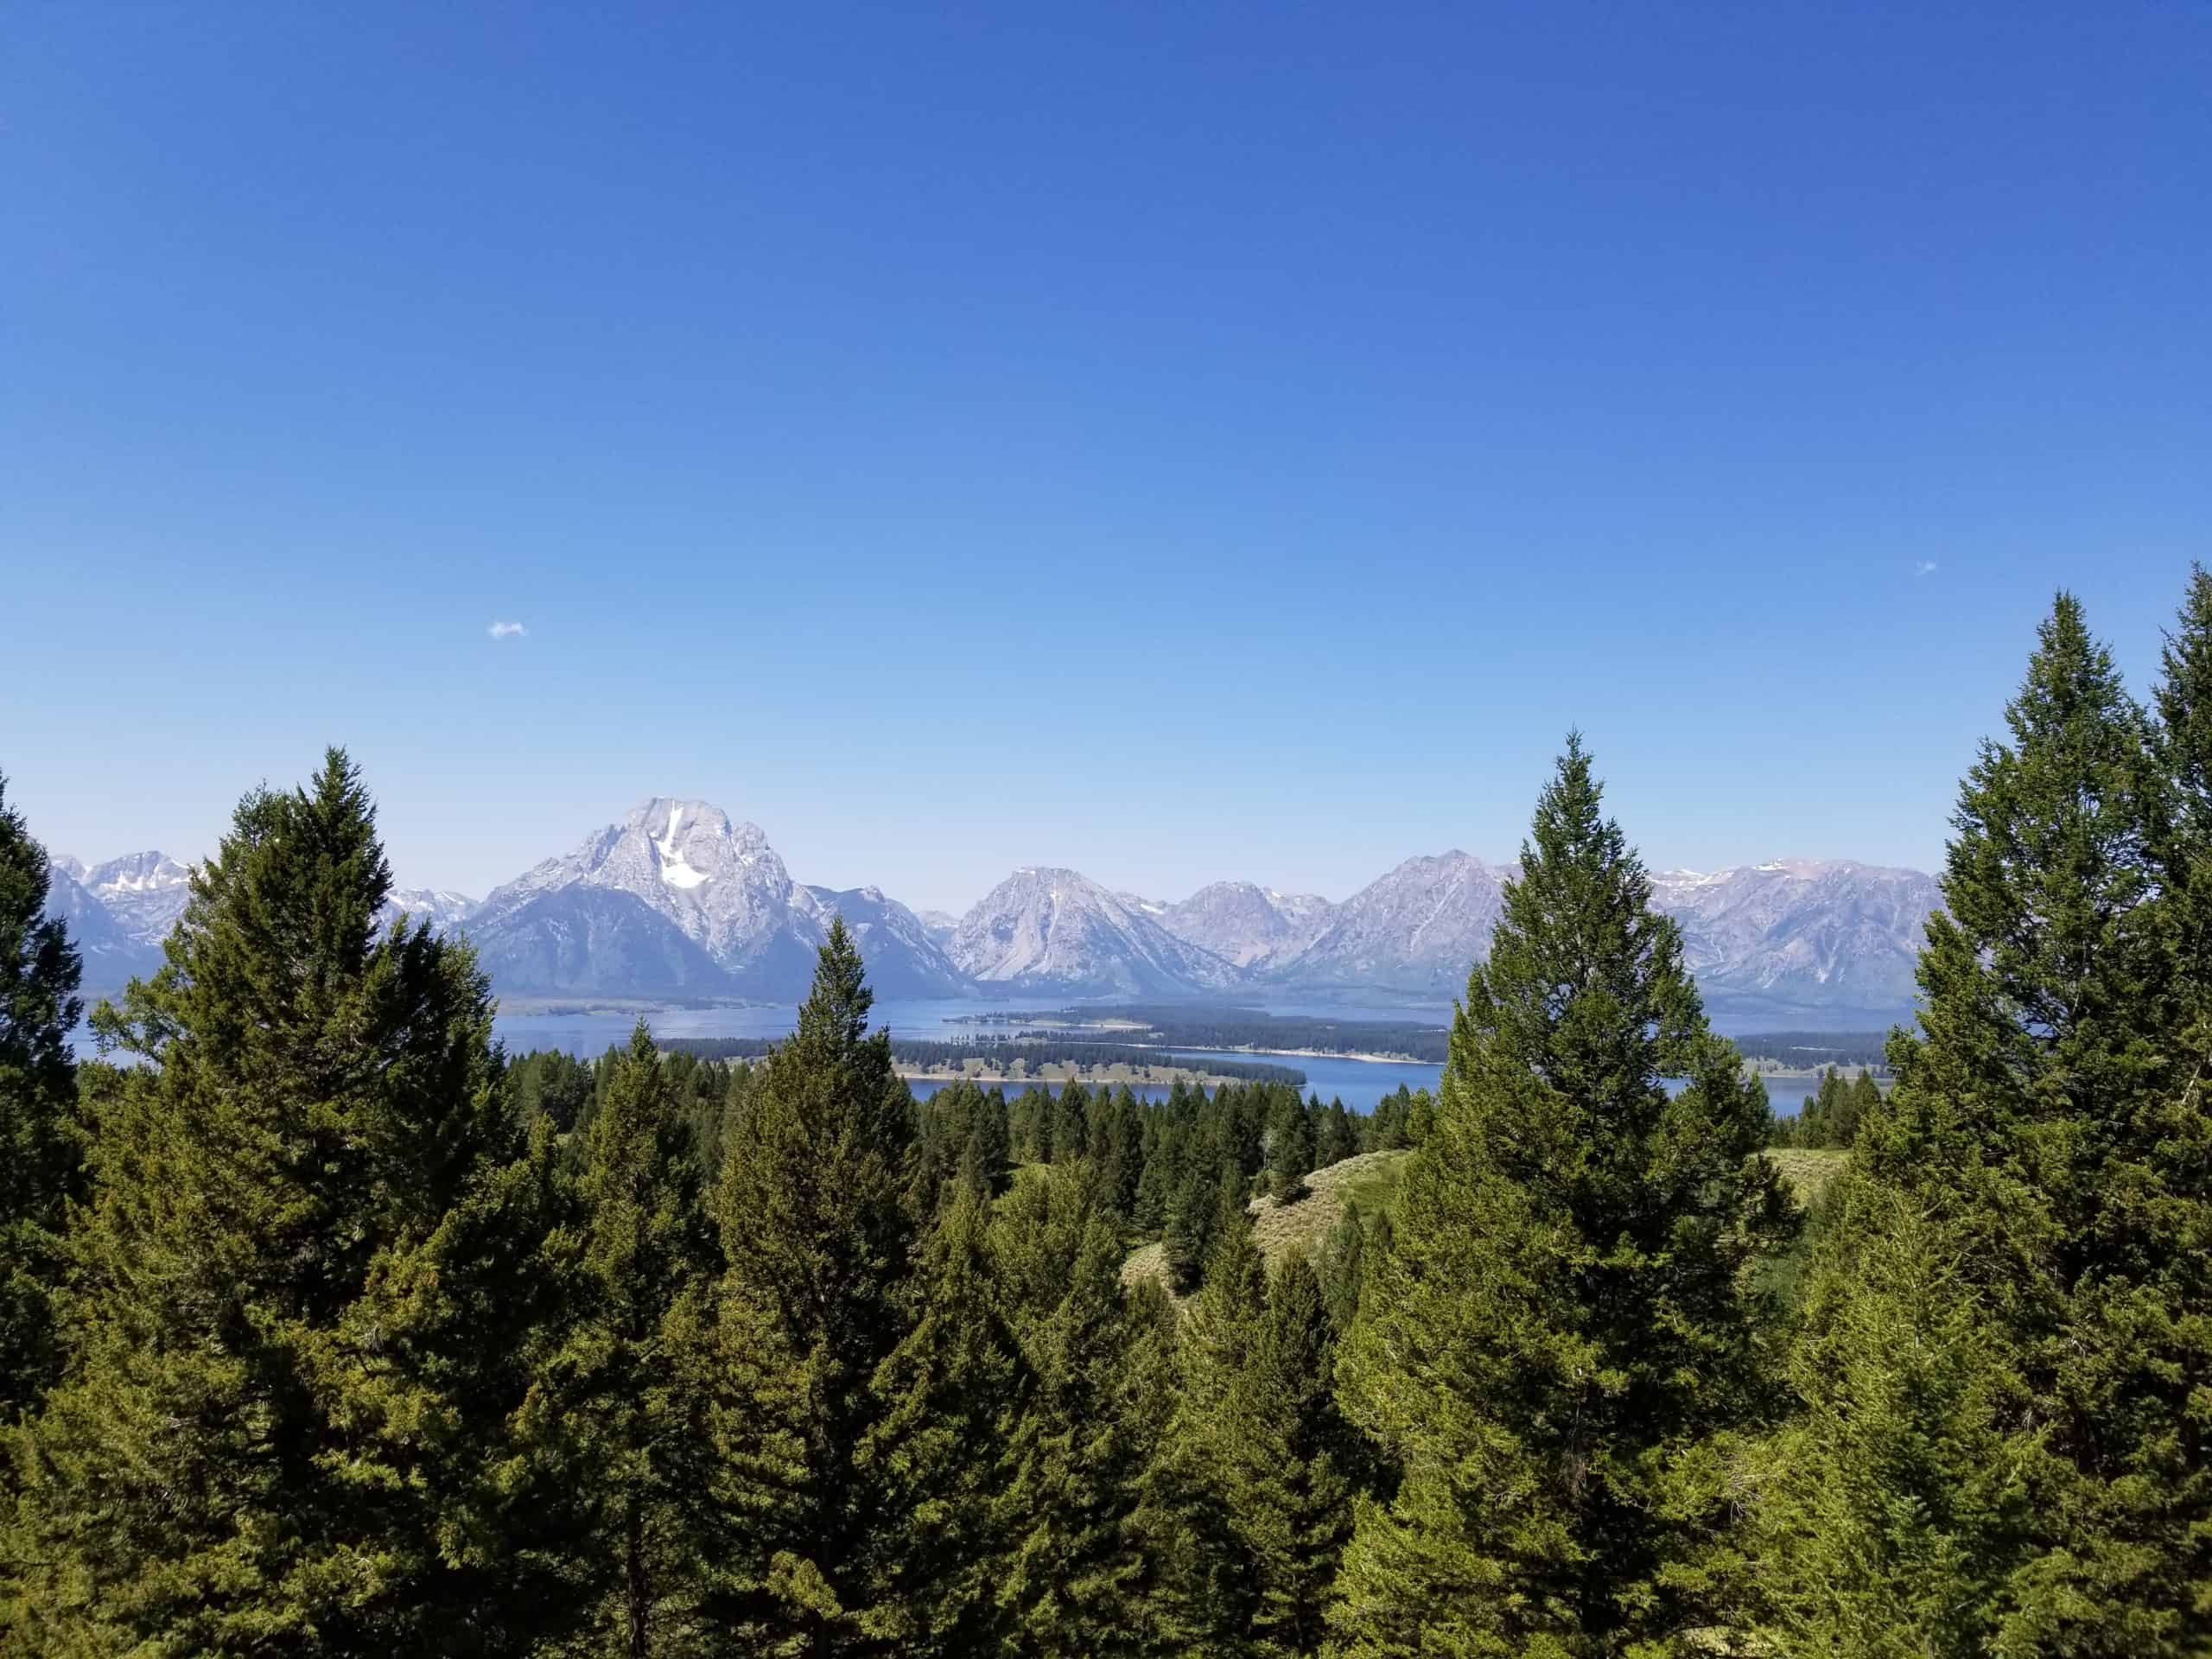 An idyllic view of majestic, snow-capped mountain peaks towering over a tranquil lake, framed by lush evergreen trees under a vast, clear blue sky.